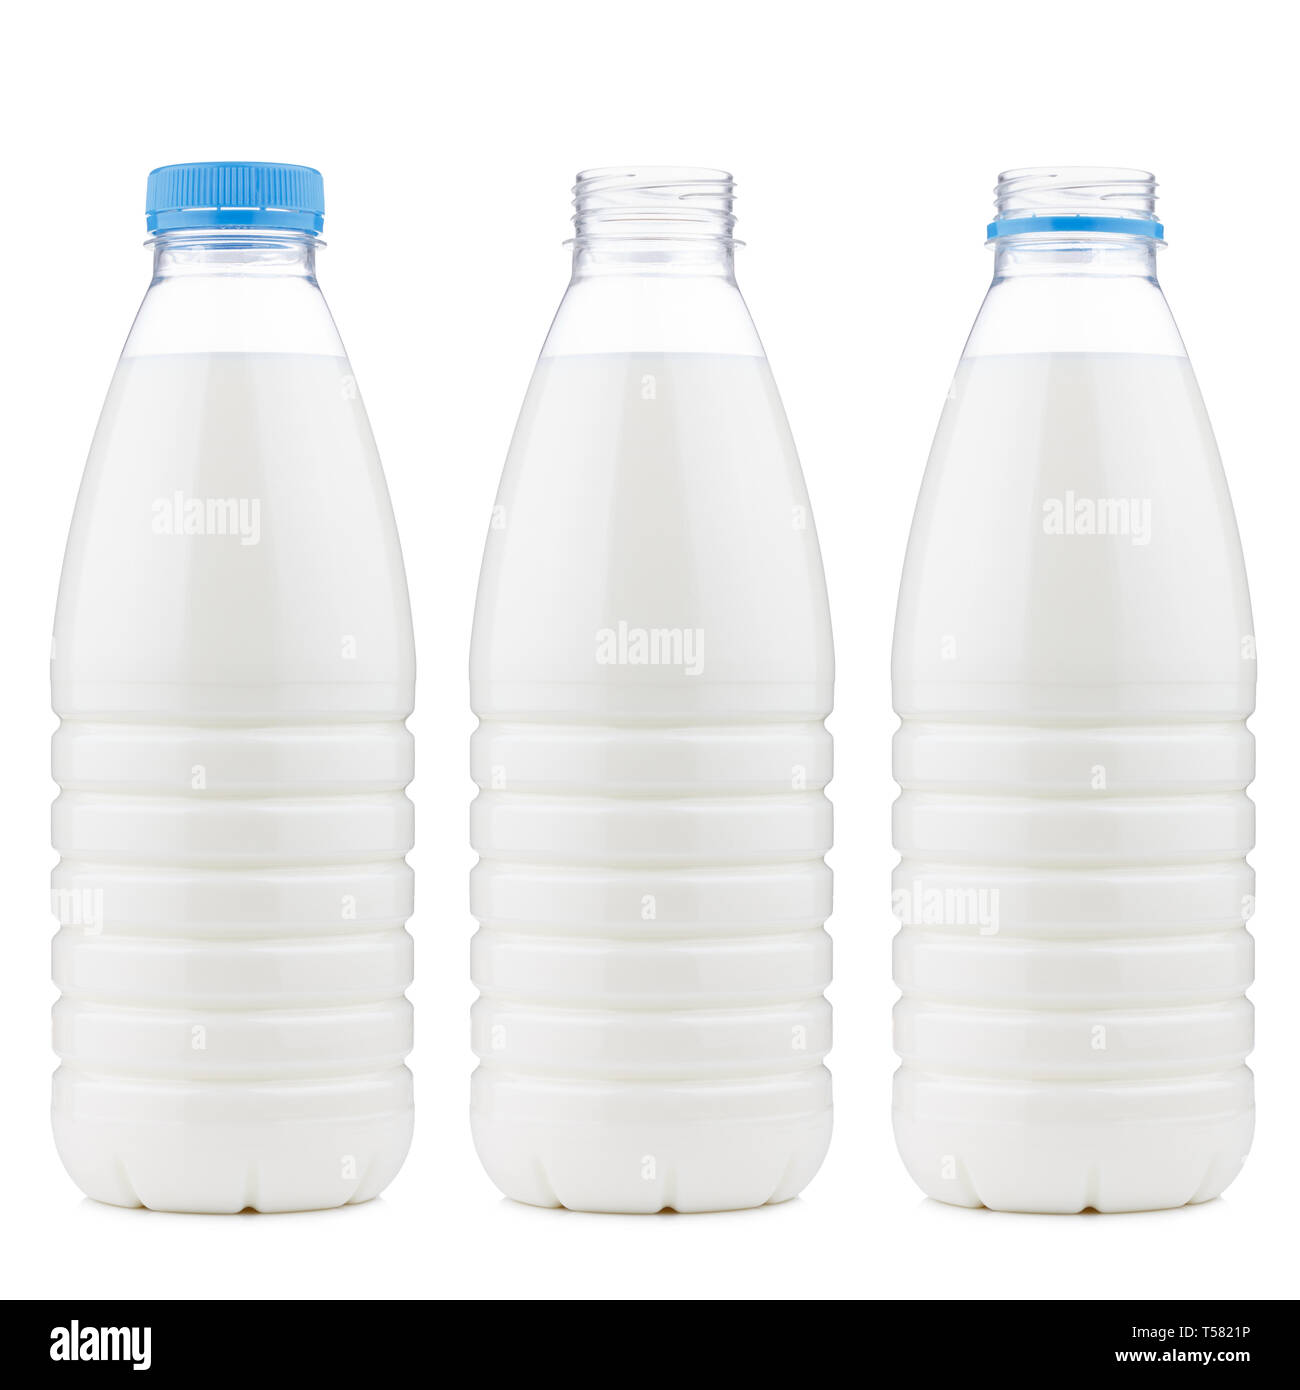 Plastic 1 liter milk bottle closed and open, isolated on white background Stock Photo